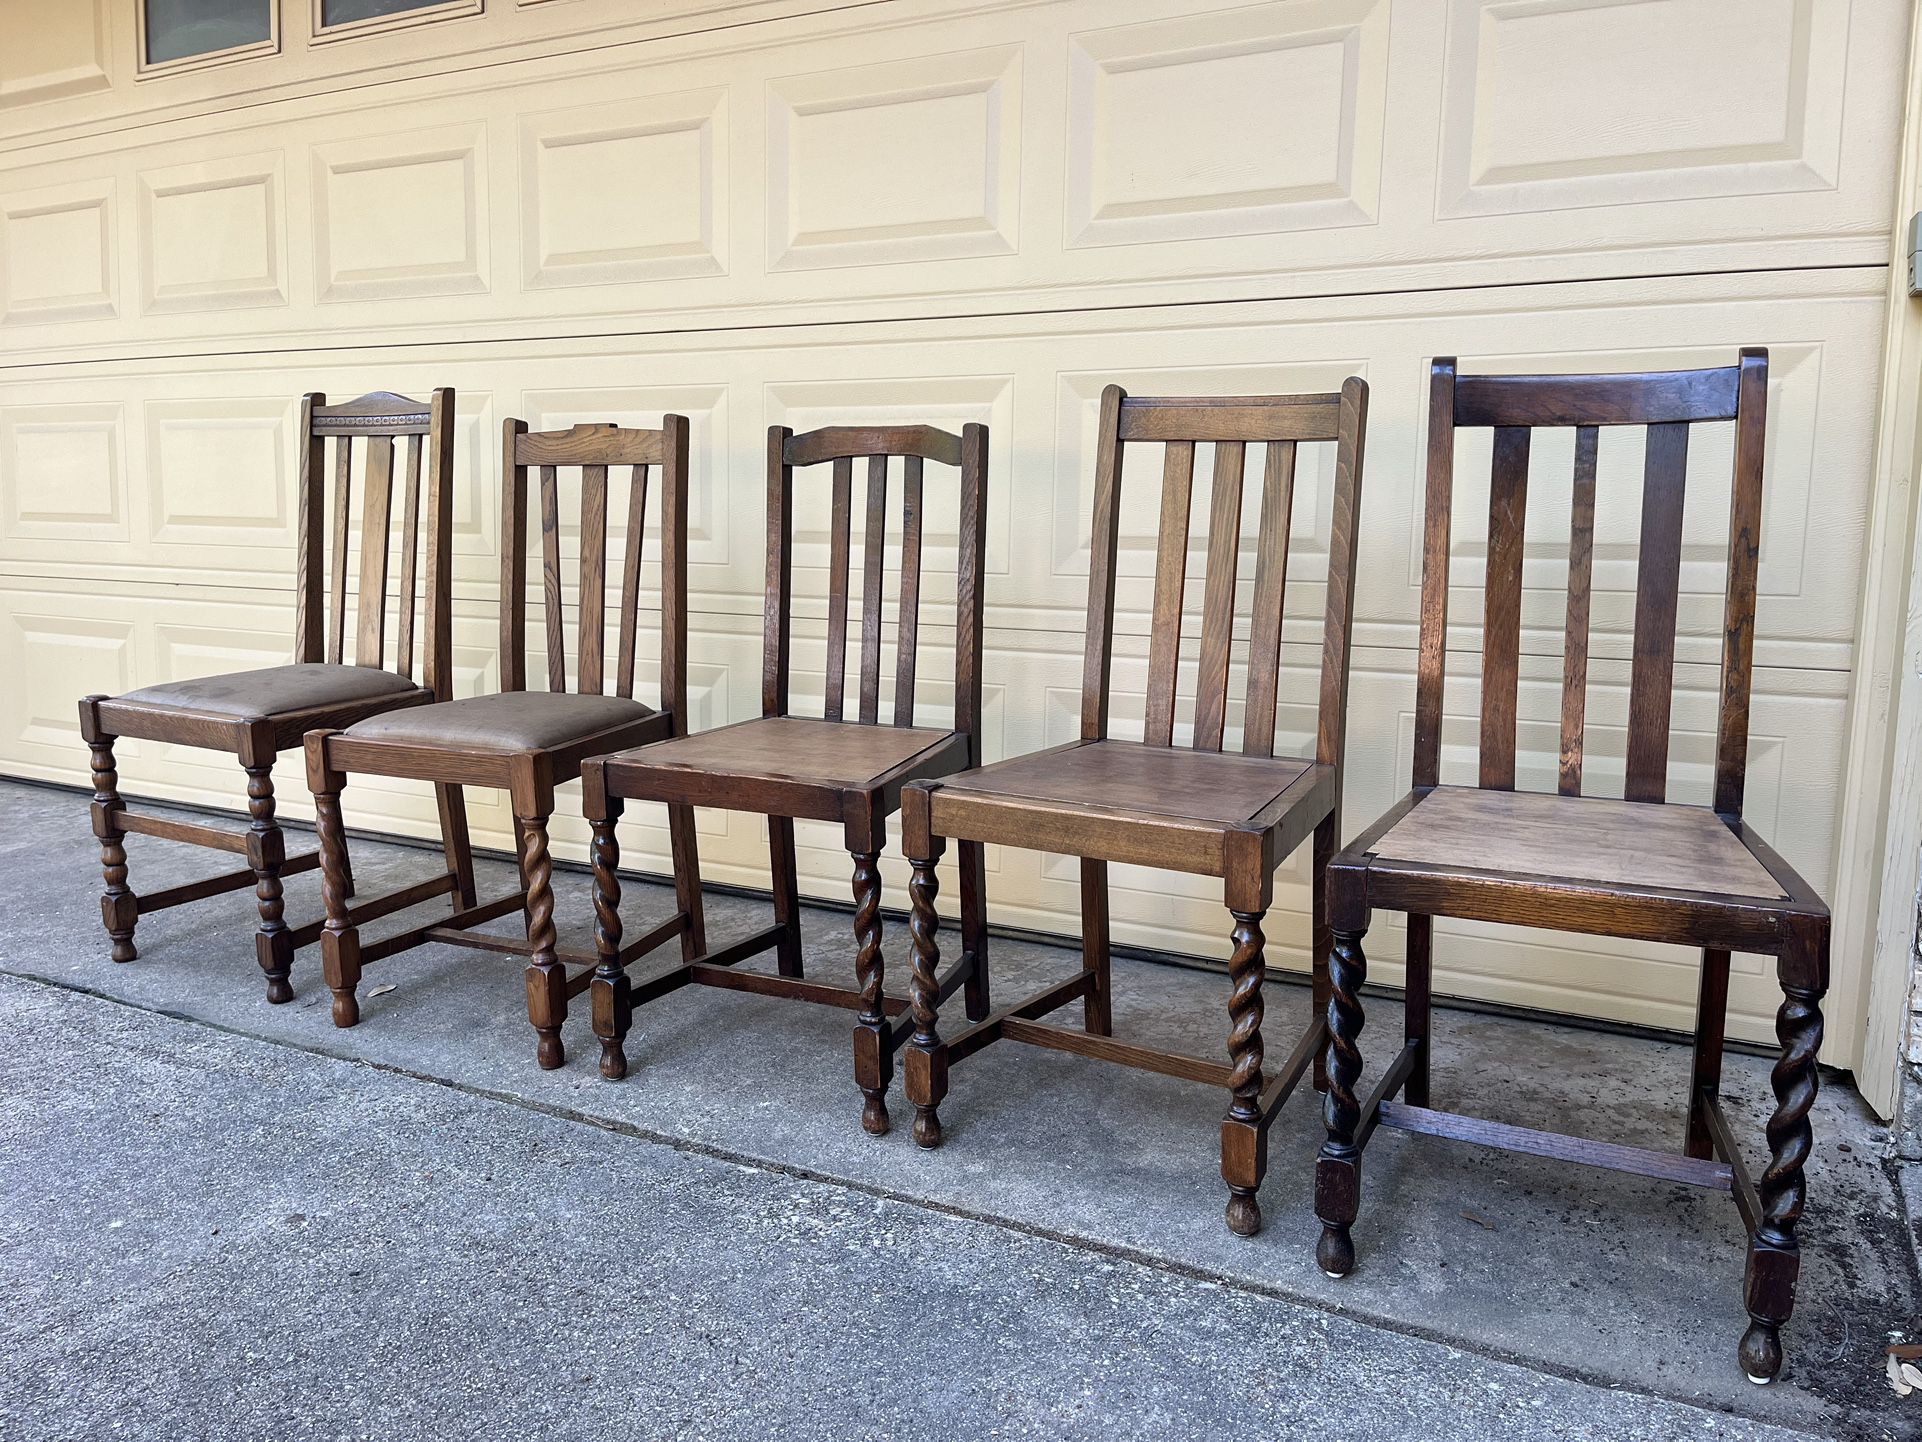 Antique English Chairs (4 Barley Twist, 1 Different)